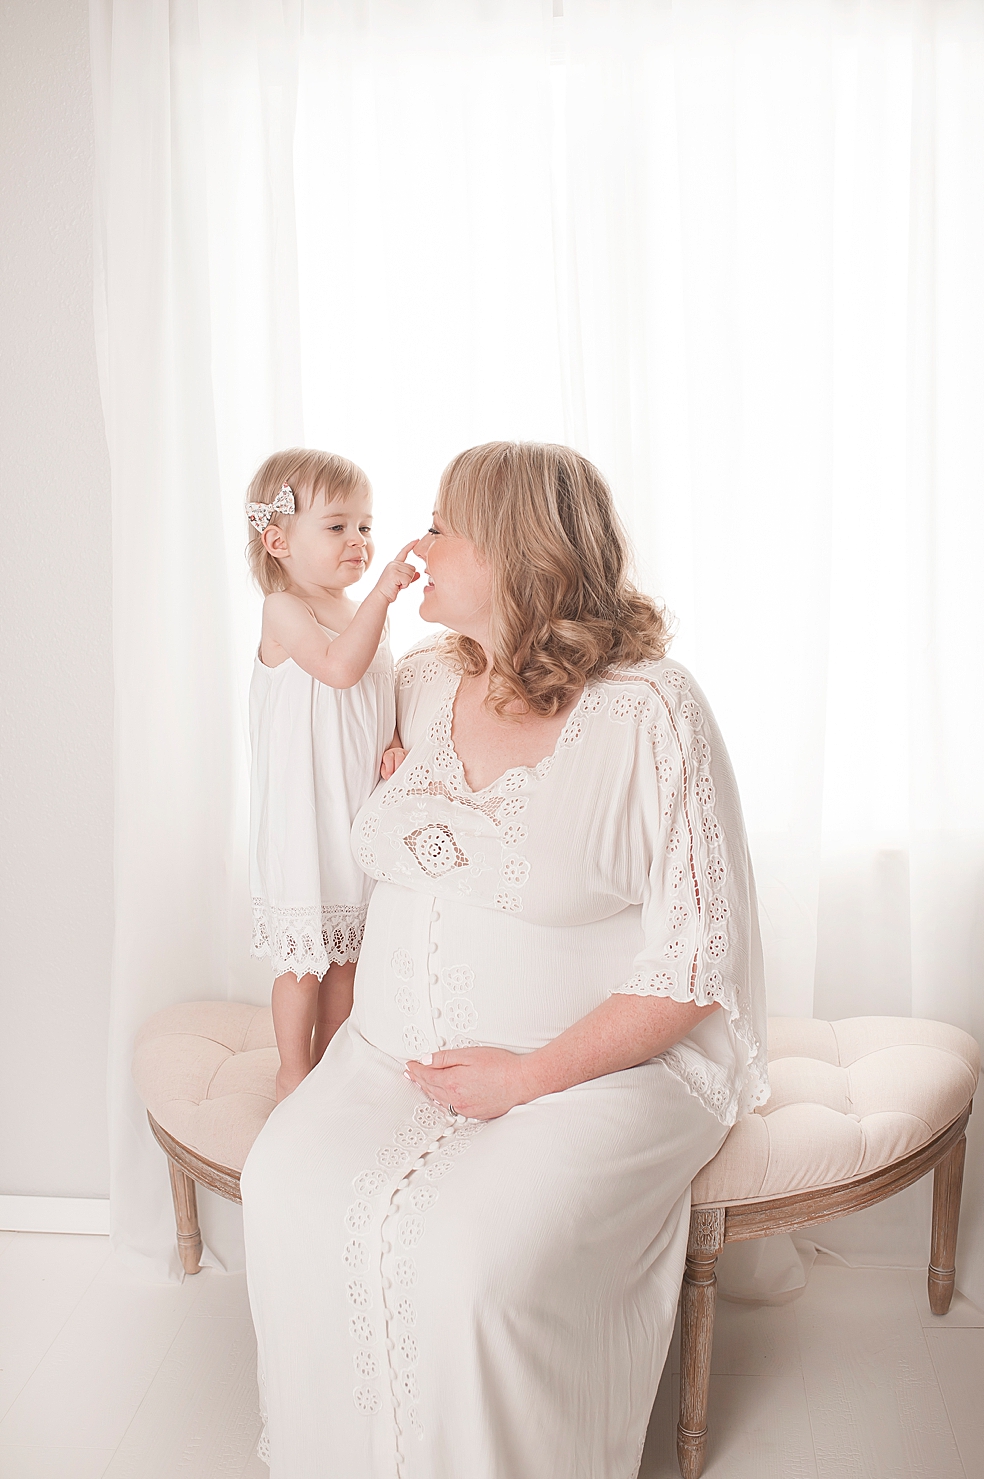 Toddler girl in white playing with mom | Photo by Decatur Alabama Maternity Photographer Jessica Lee